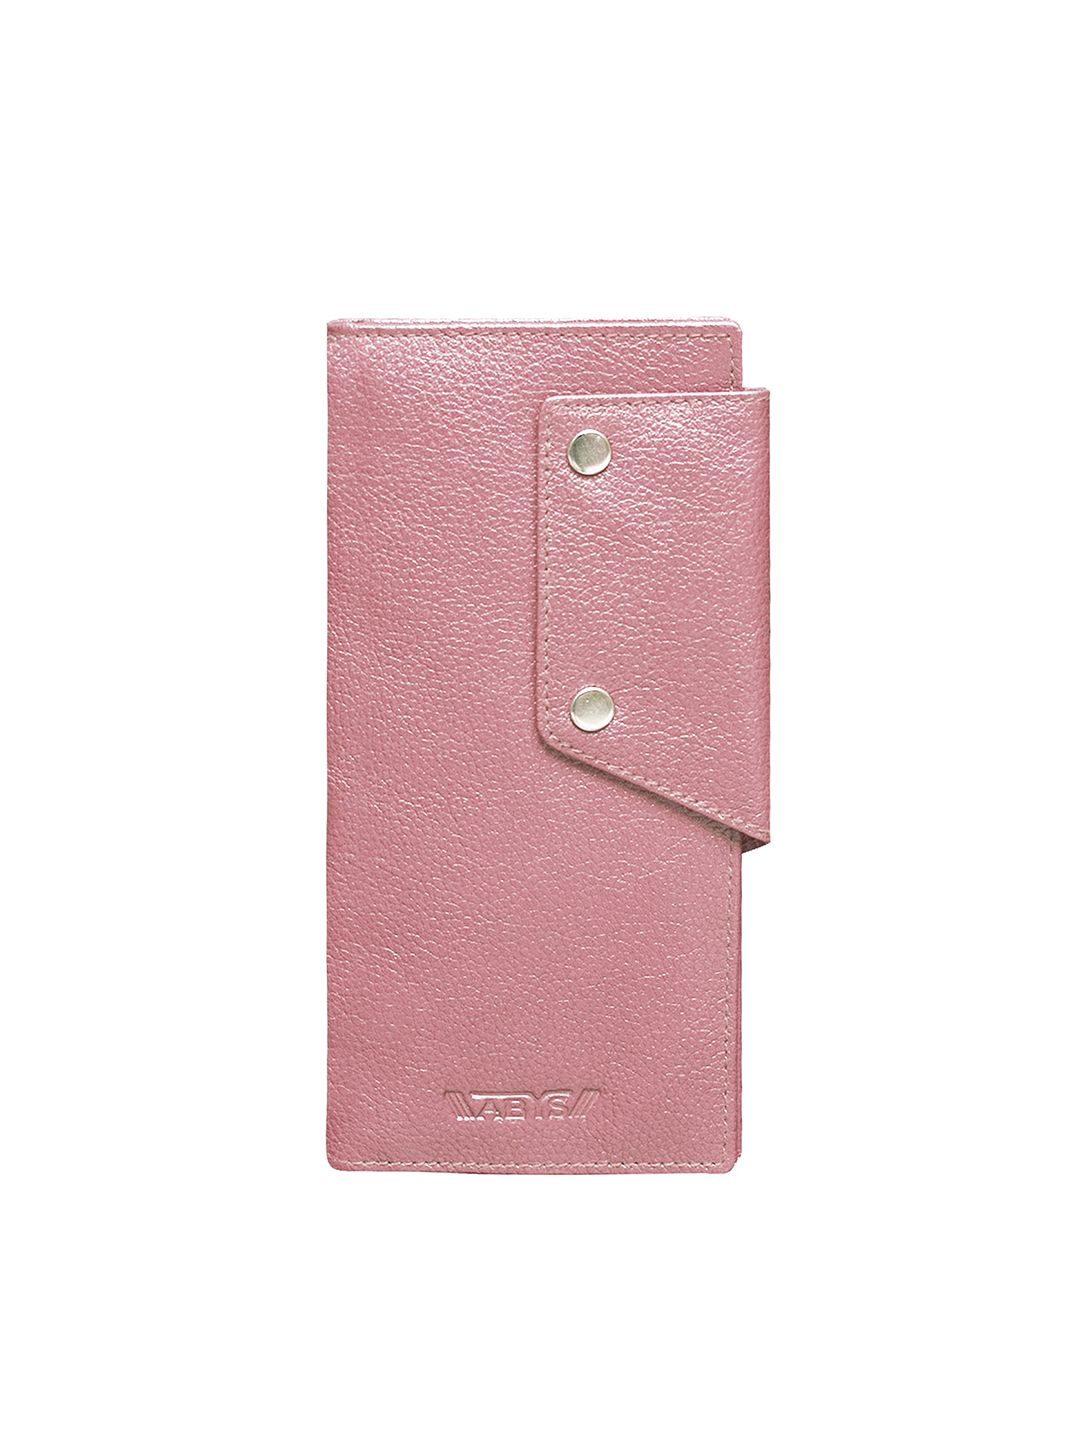 ABYS Unisex Pink Solid leather Two Fold Wallet Price in India